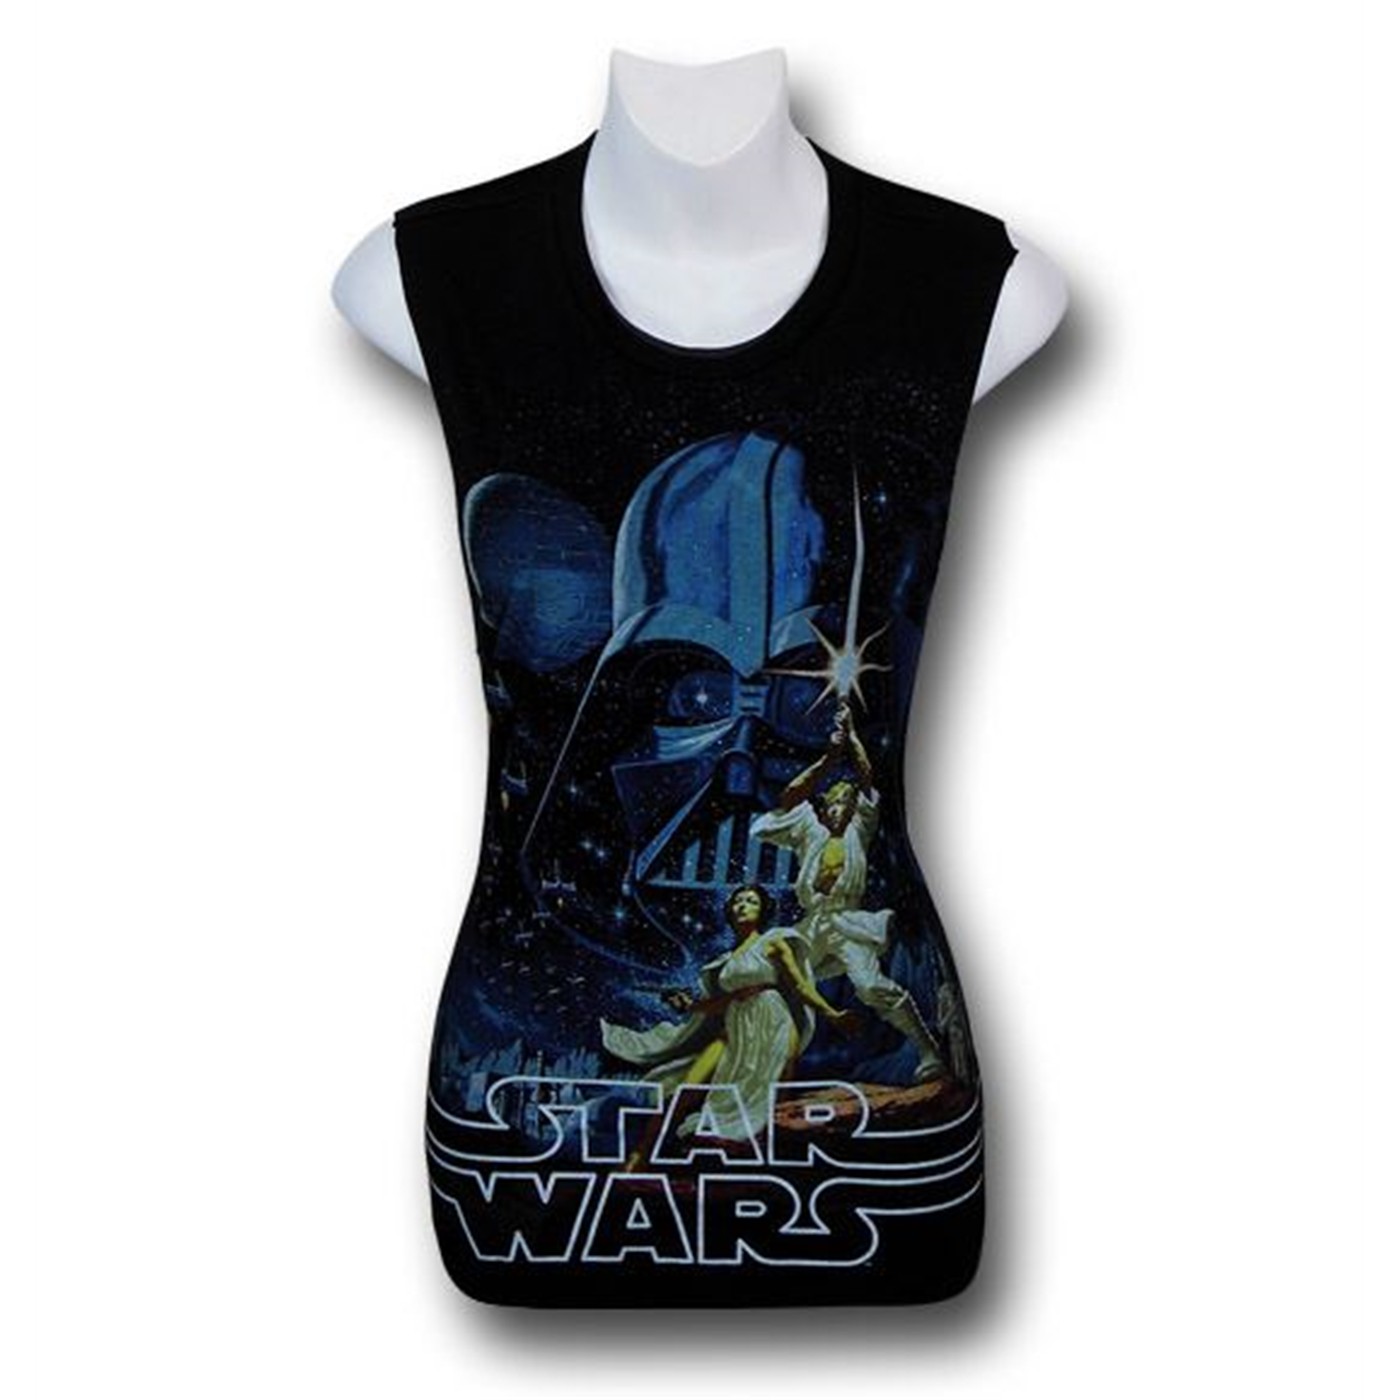 Star Wars Poster Women's Cut-Out Tank Top